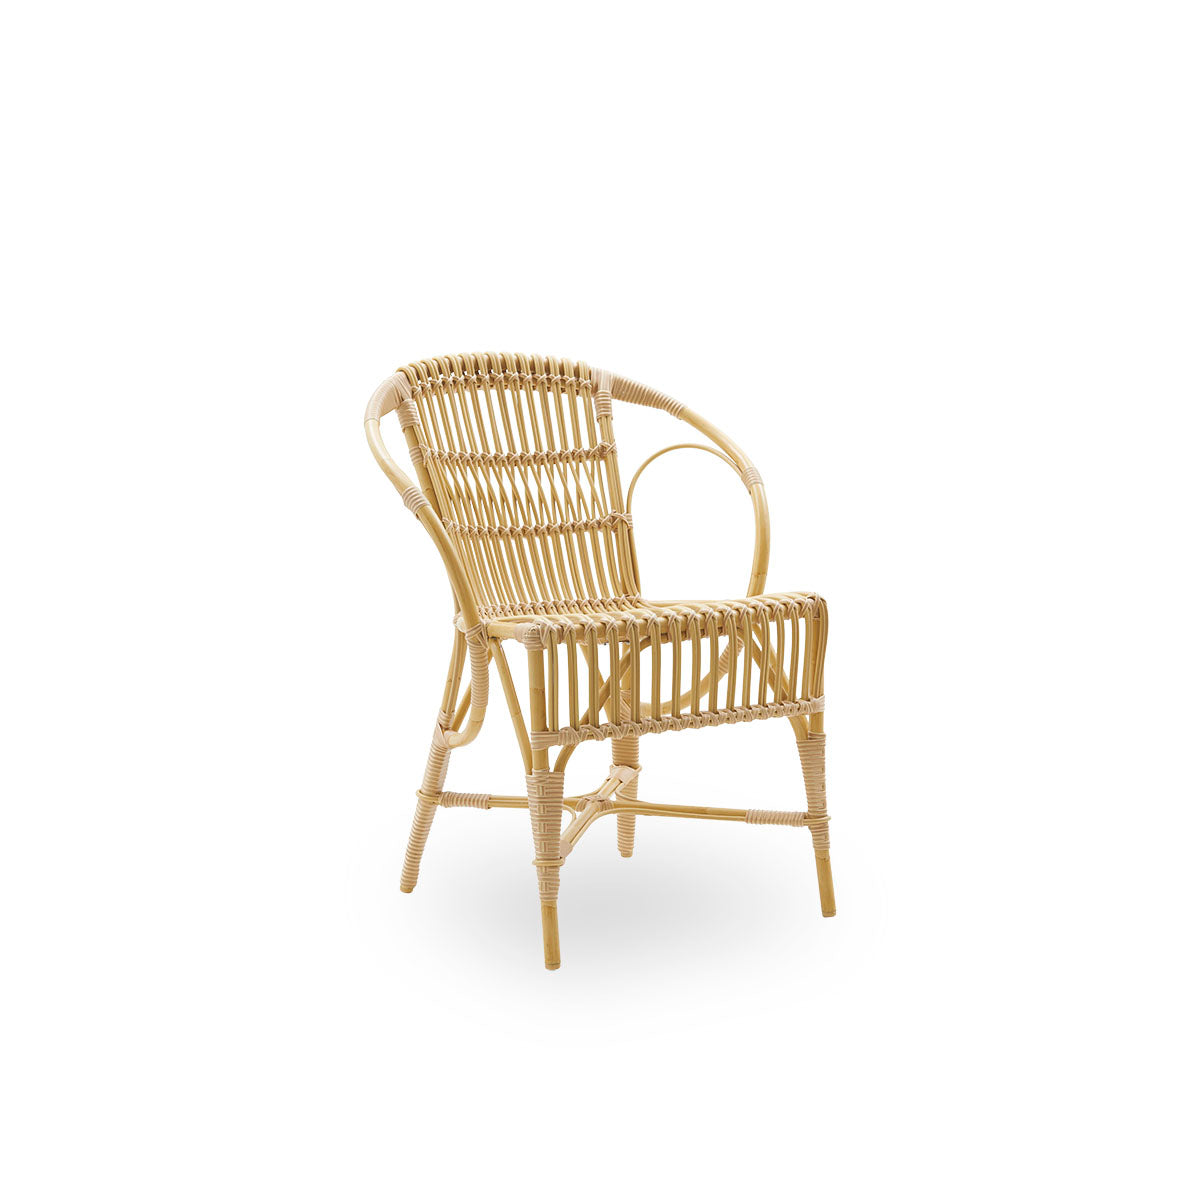 Robert Exterior Dining Chair by Sika